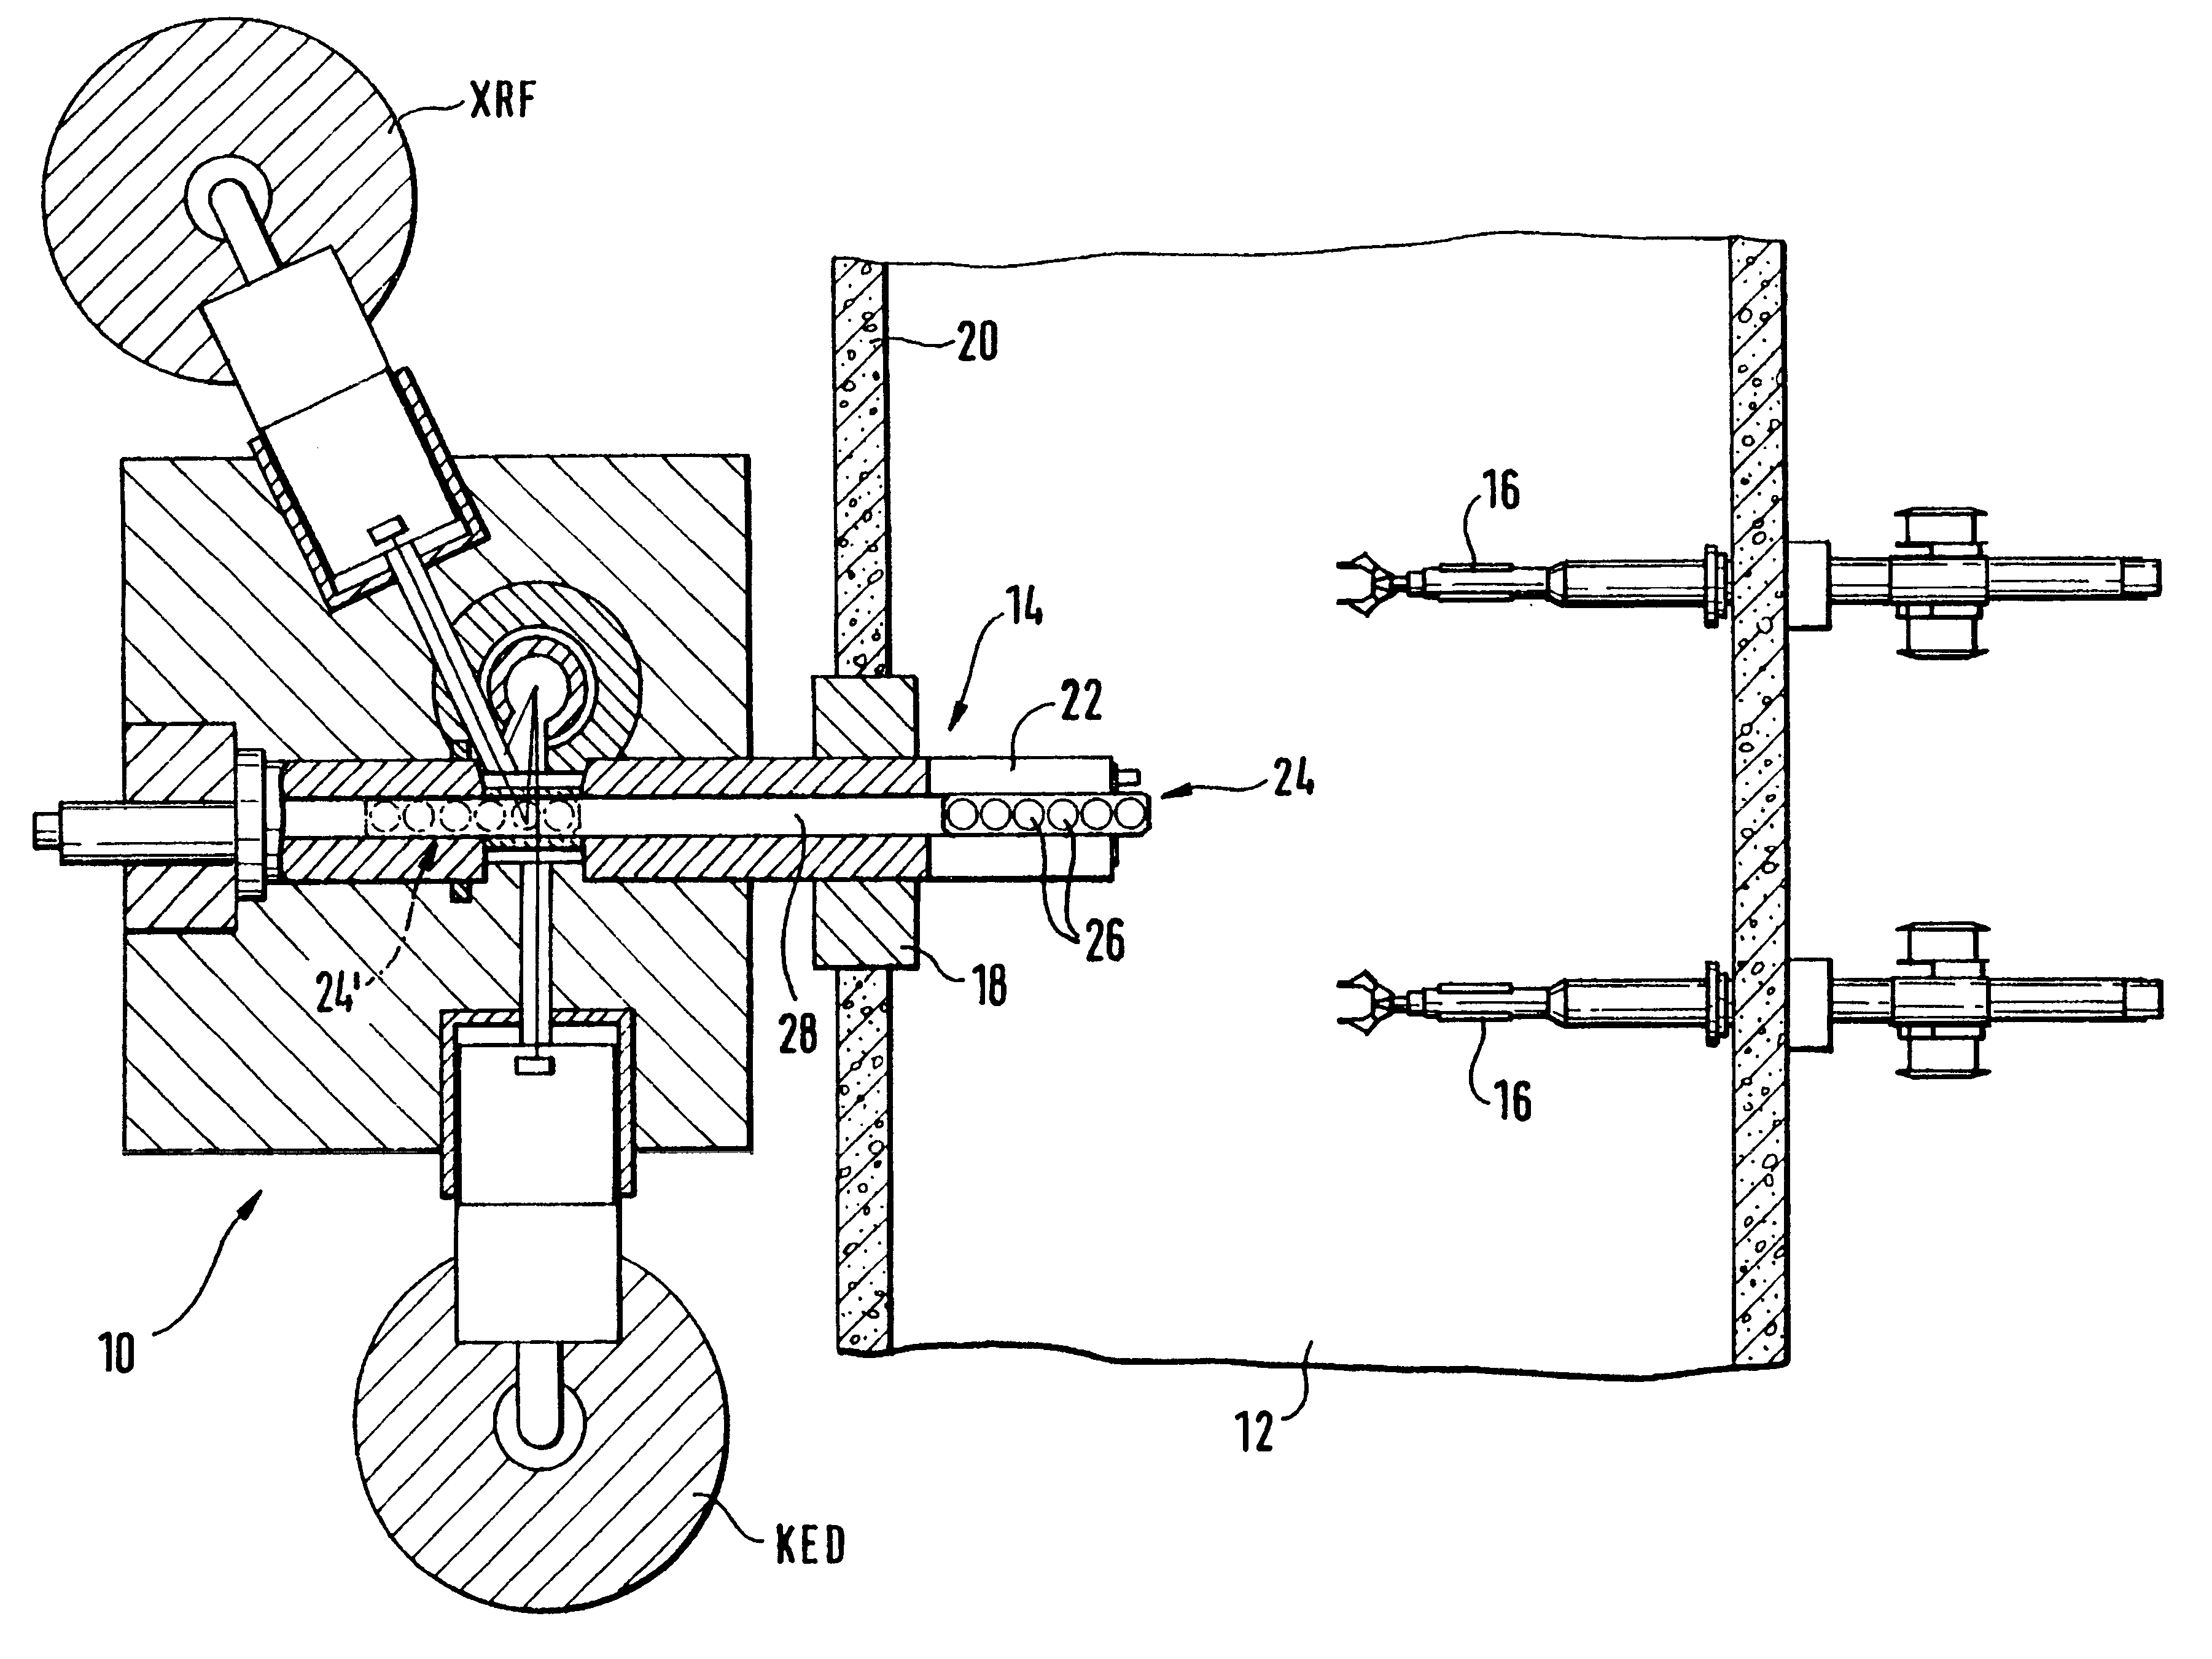 Sample changer for transferring radioactive samples between a hot cell and a measuring apparatus